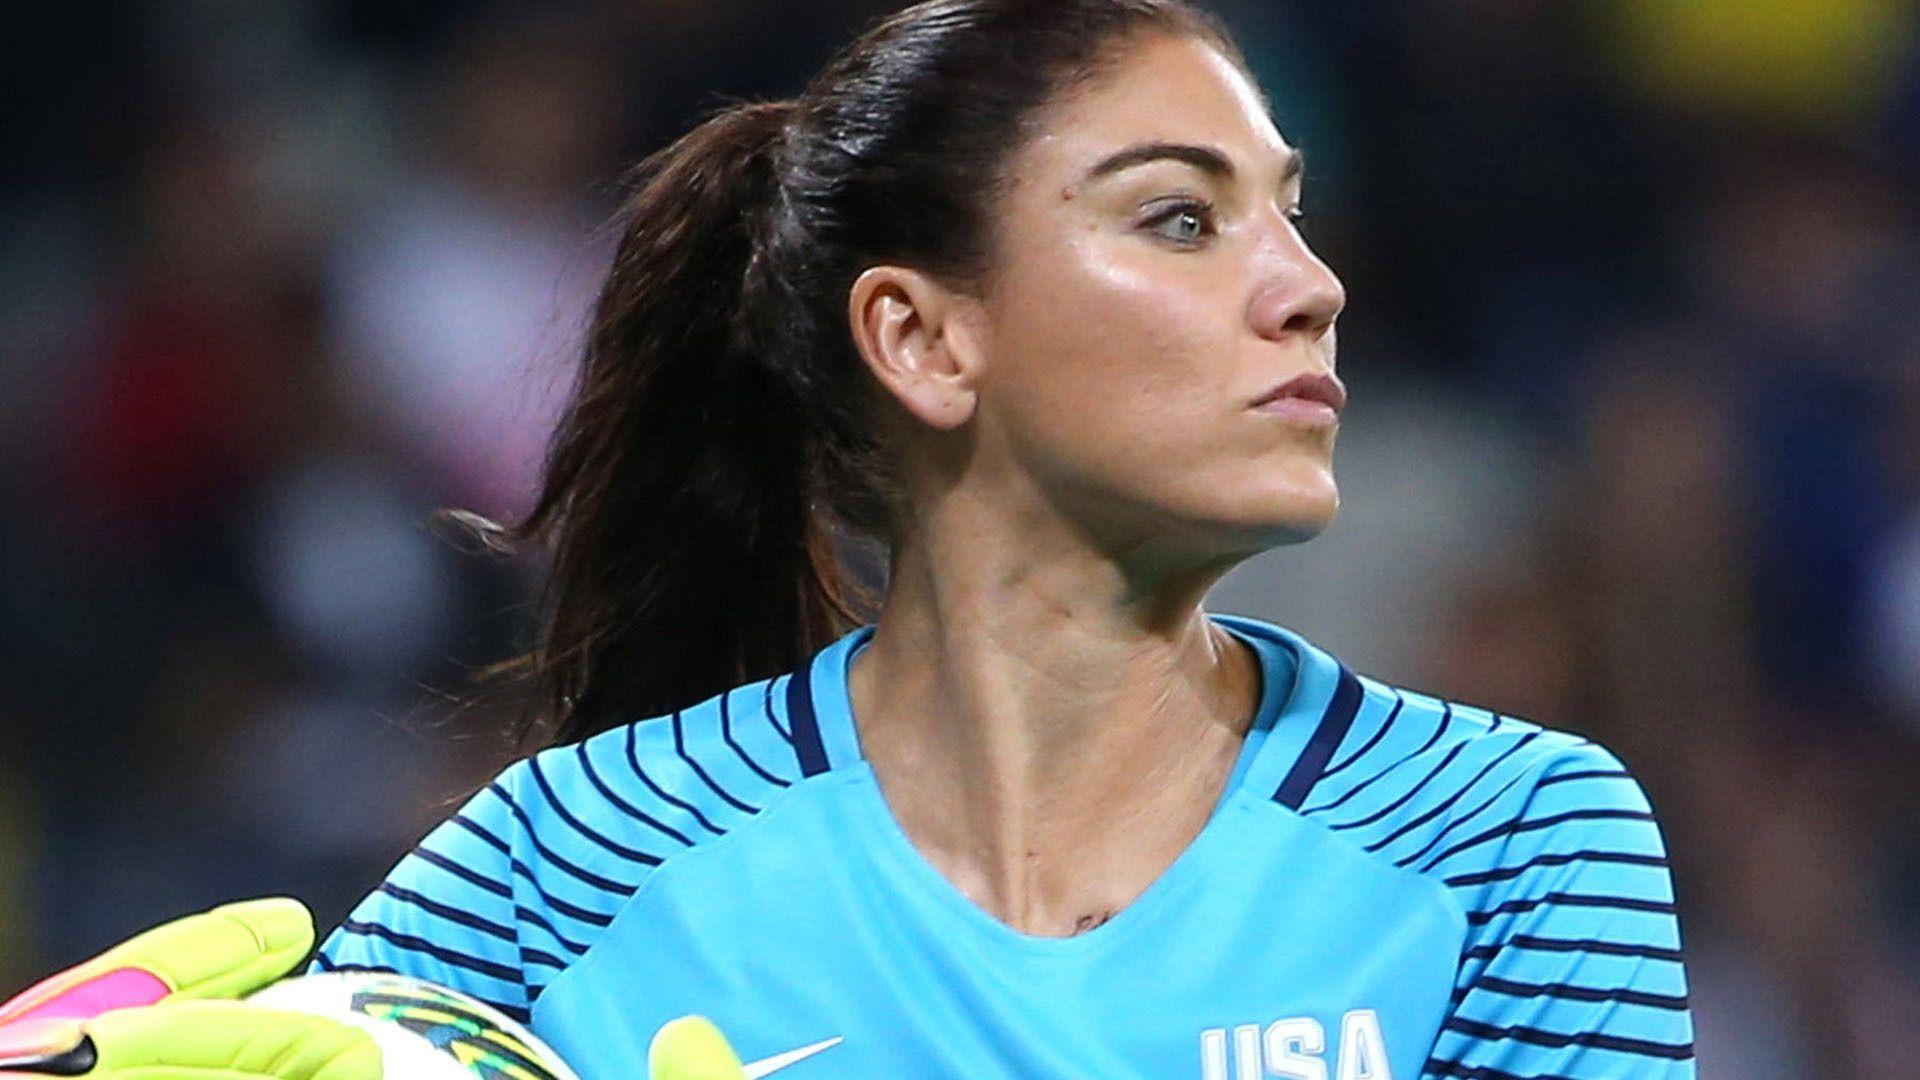 Hope Solo Wallpapers Image Photos Pictures Backgrounds.